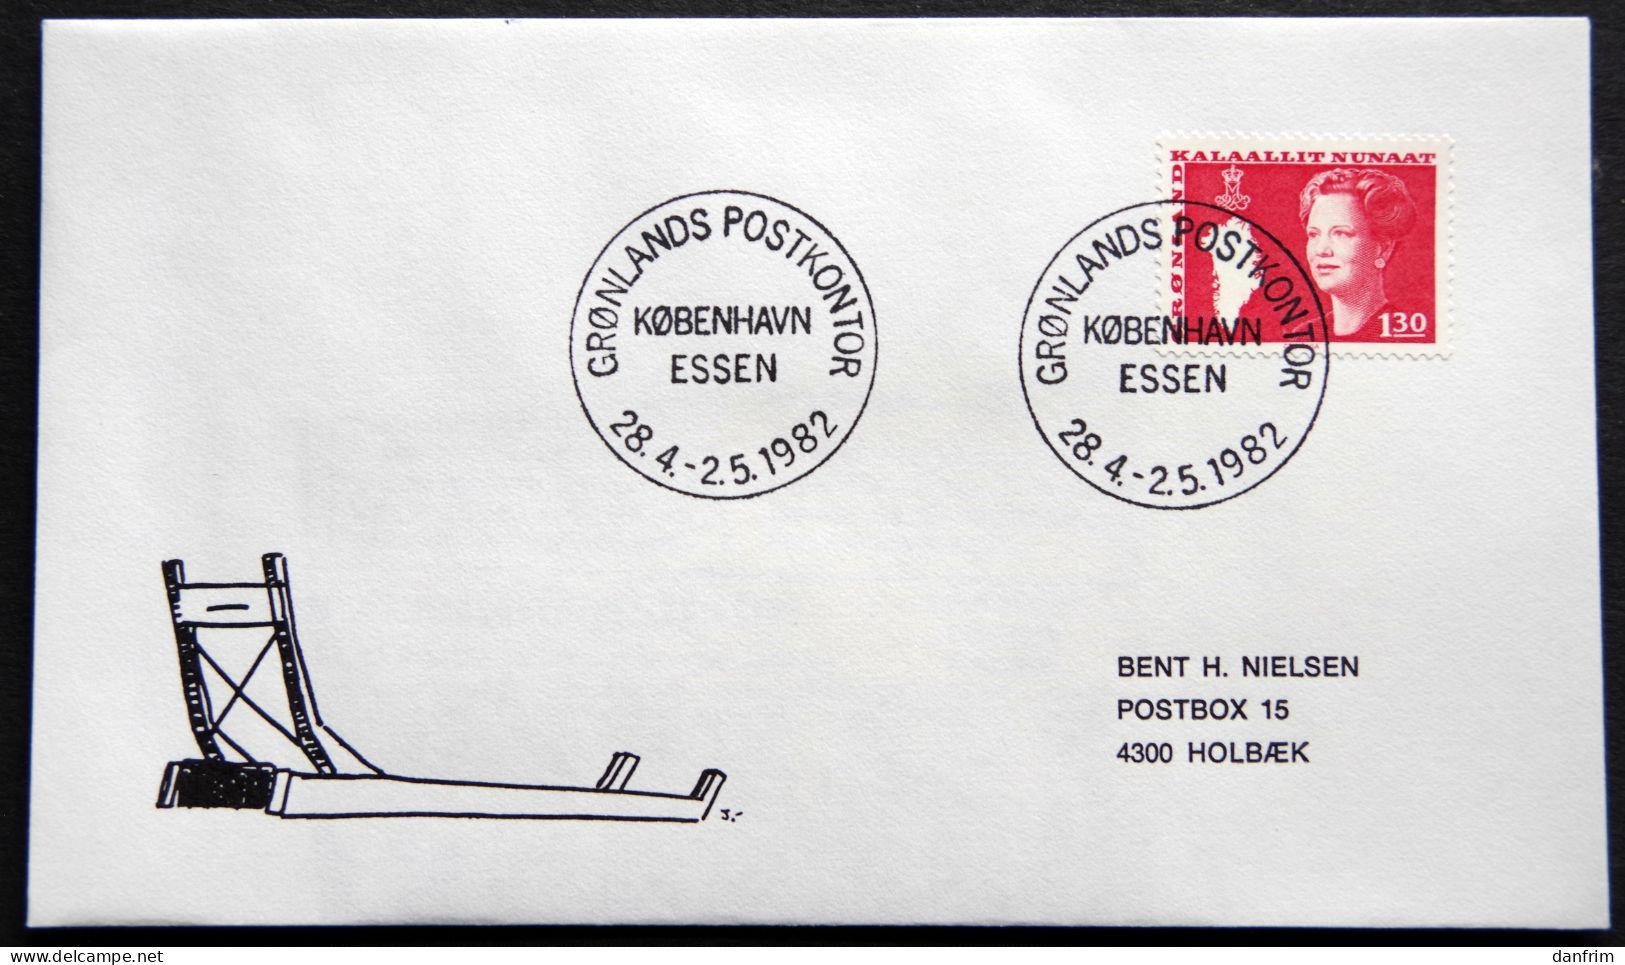 Greenland 1982 SPECIAL POSTMARKS. ESSEN 28.4-2.5. 1982 ( Lot 929) - Covers & Documents